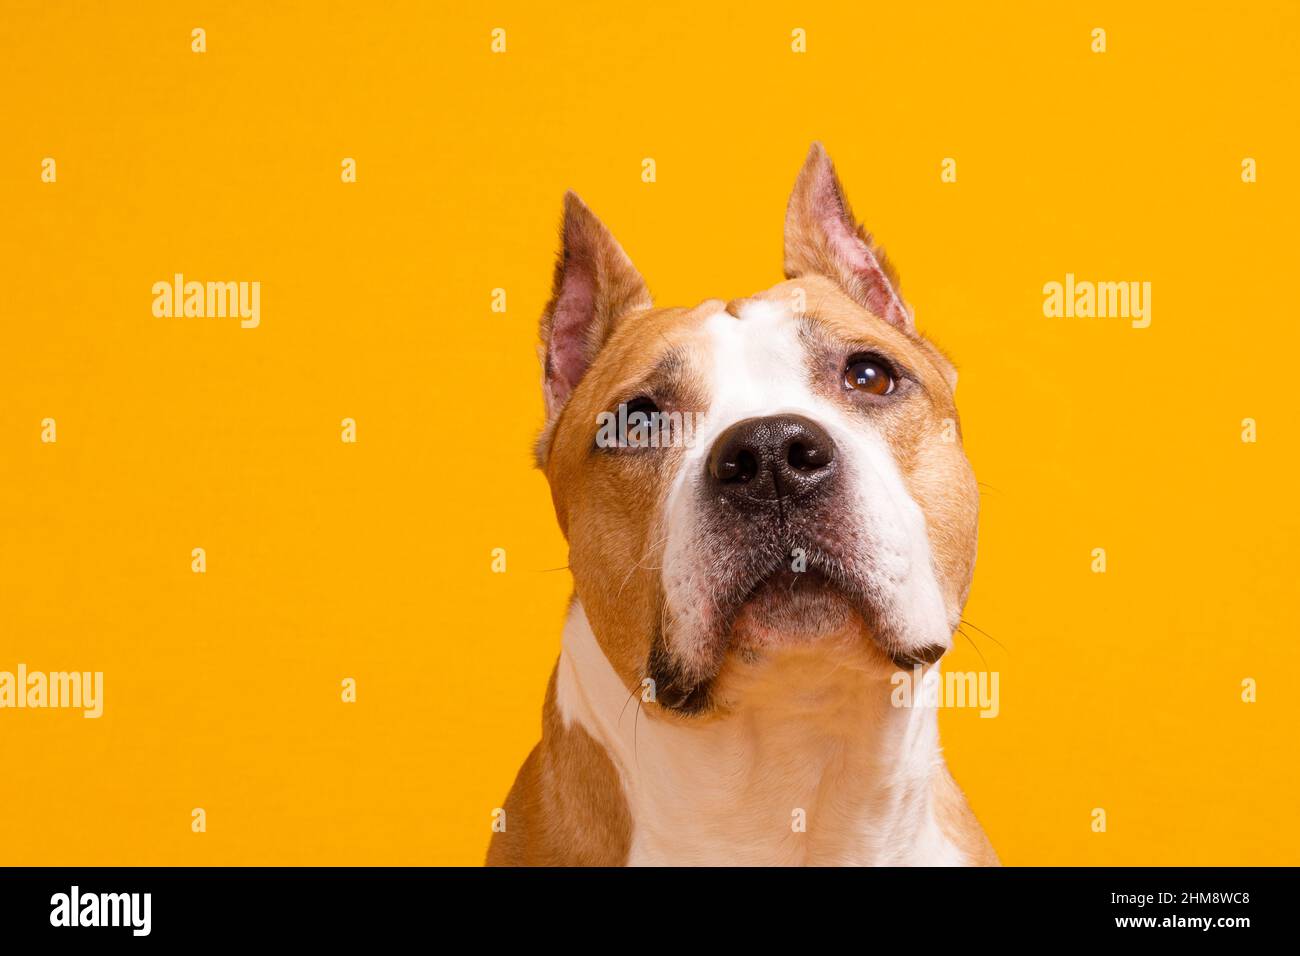 dog american staffordshire terrier looking up on yellow background. High quality photo Stock Photo